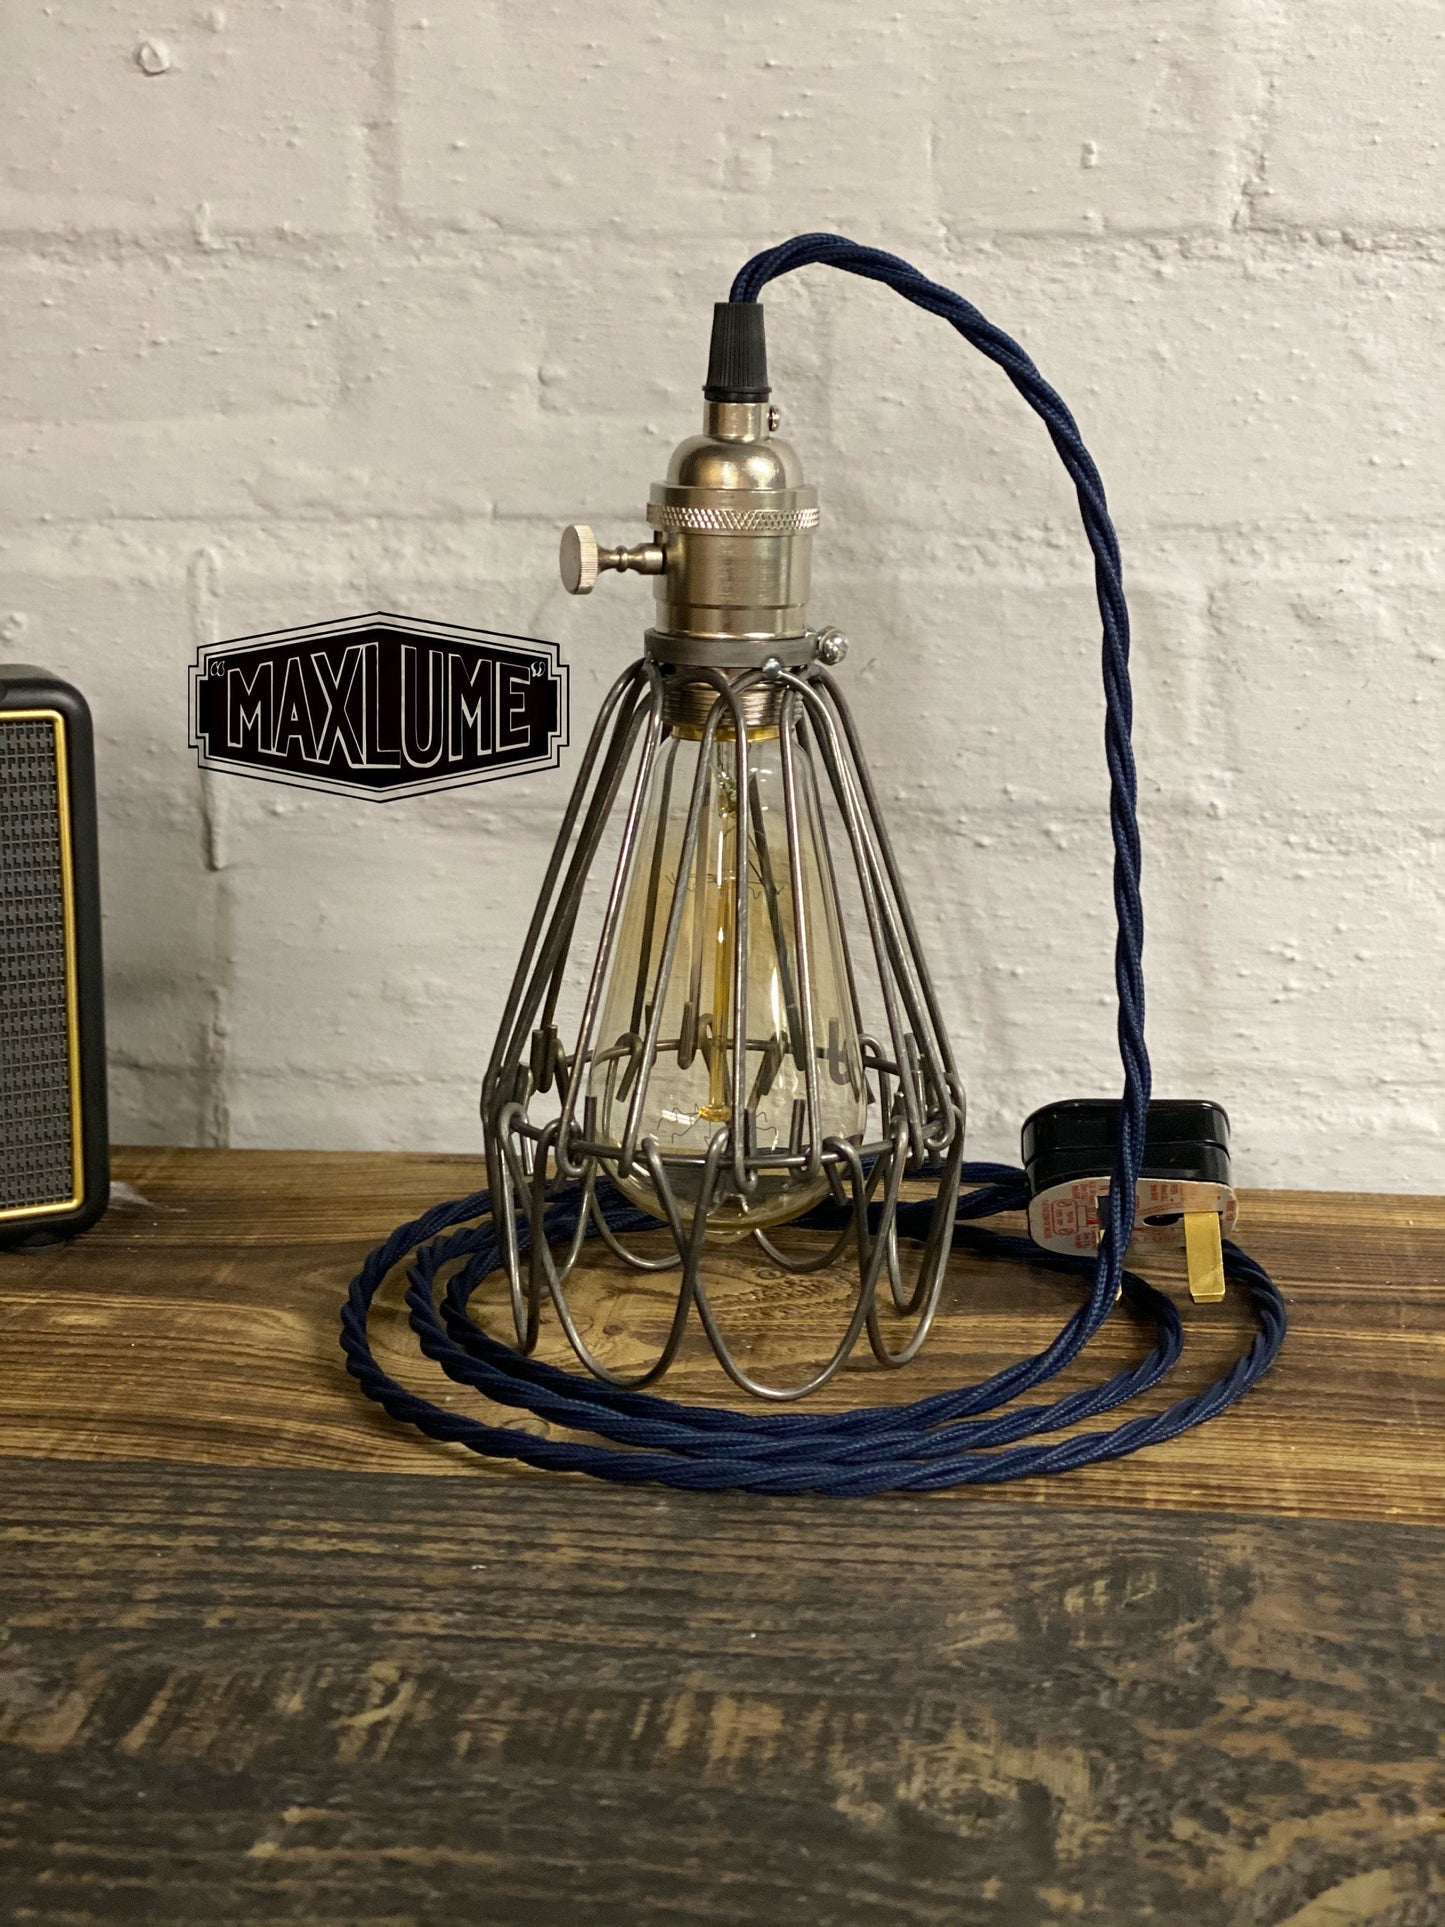 Hemsby ~ Raw Steel Cage Bedside Lamp | Fabric Cable | Bedroom | Table Light | Vintage Retro 1 x Edison Filament Bulb